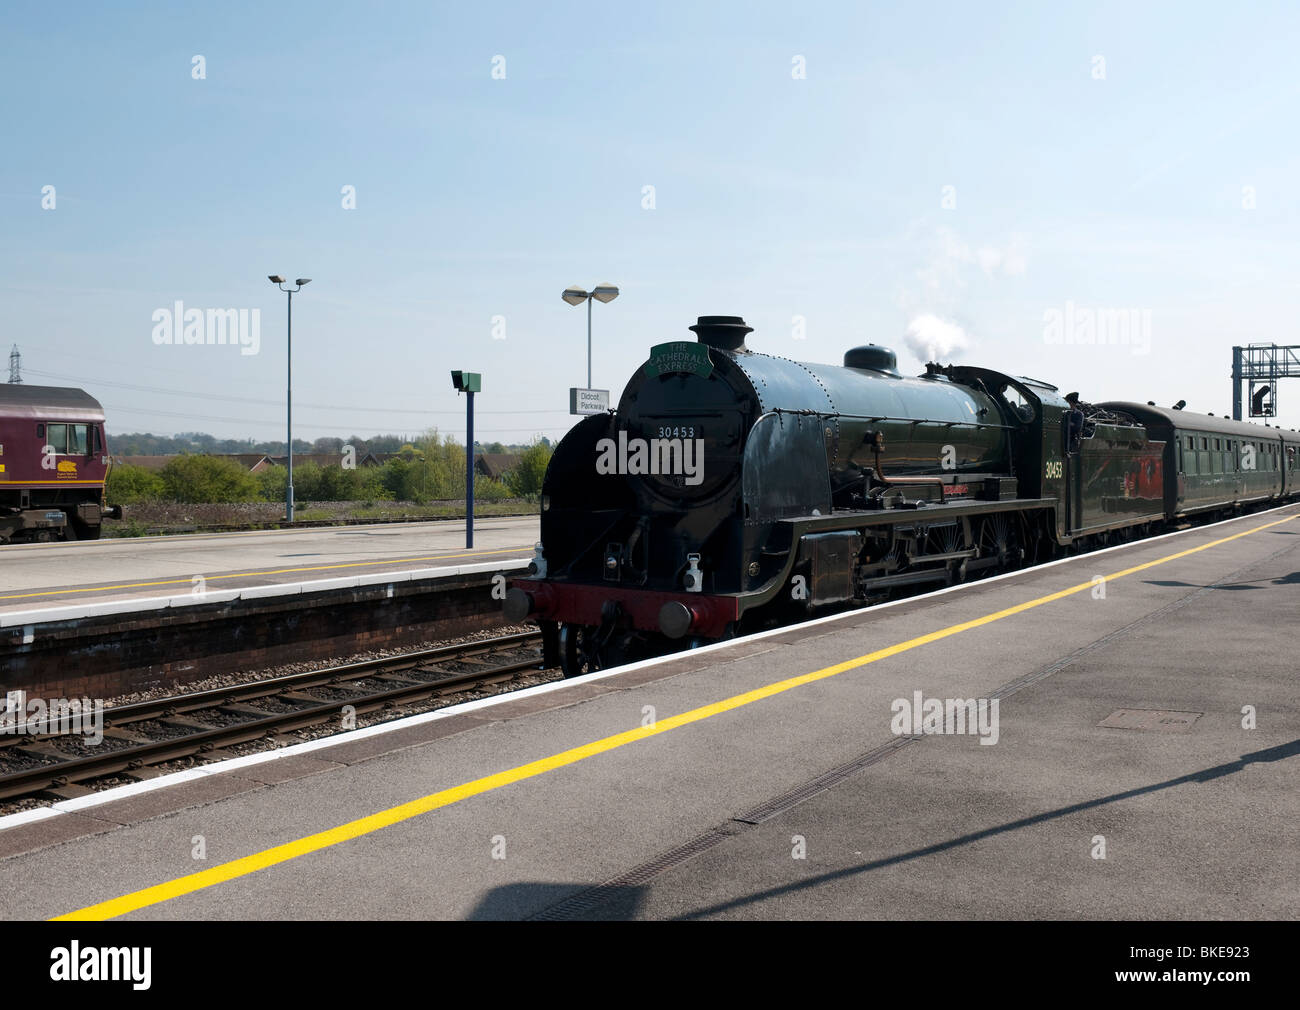 Southern Railway King Arthur Class Locomotive at Didcot Parkway Station with Excursion Train UK -2 Stock Photo